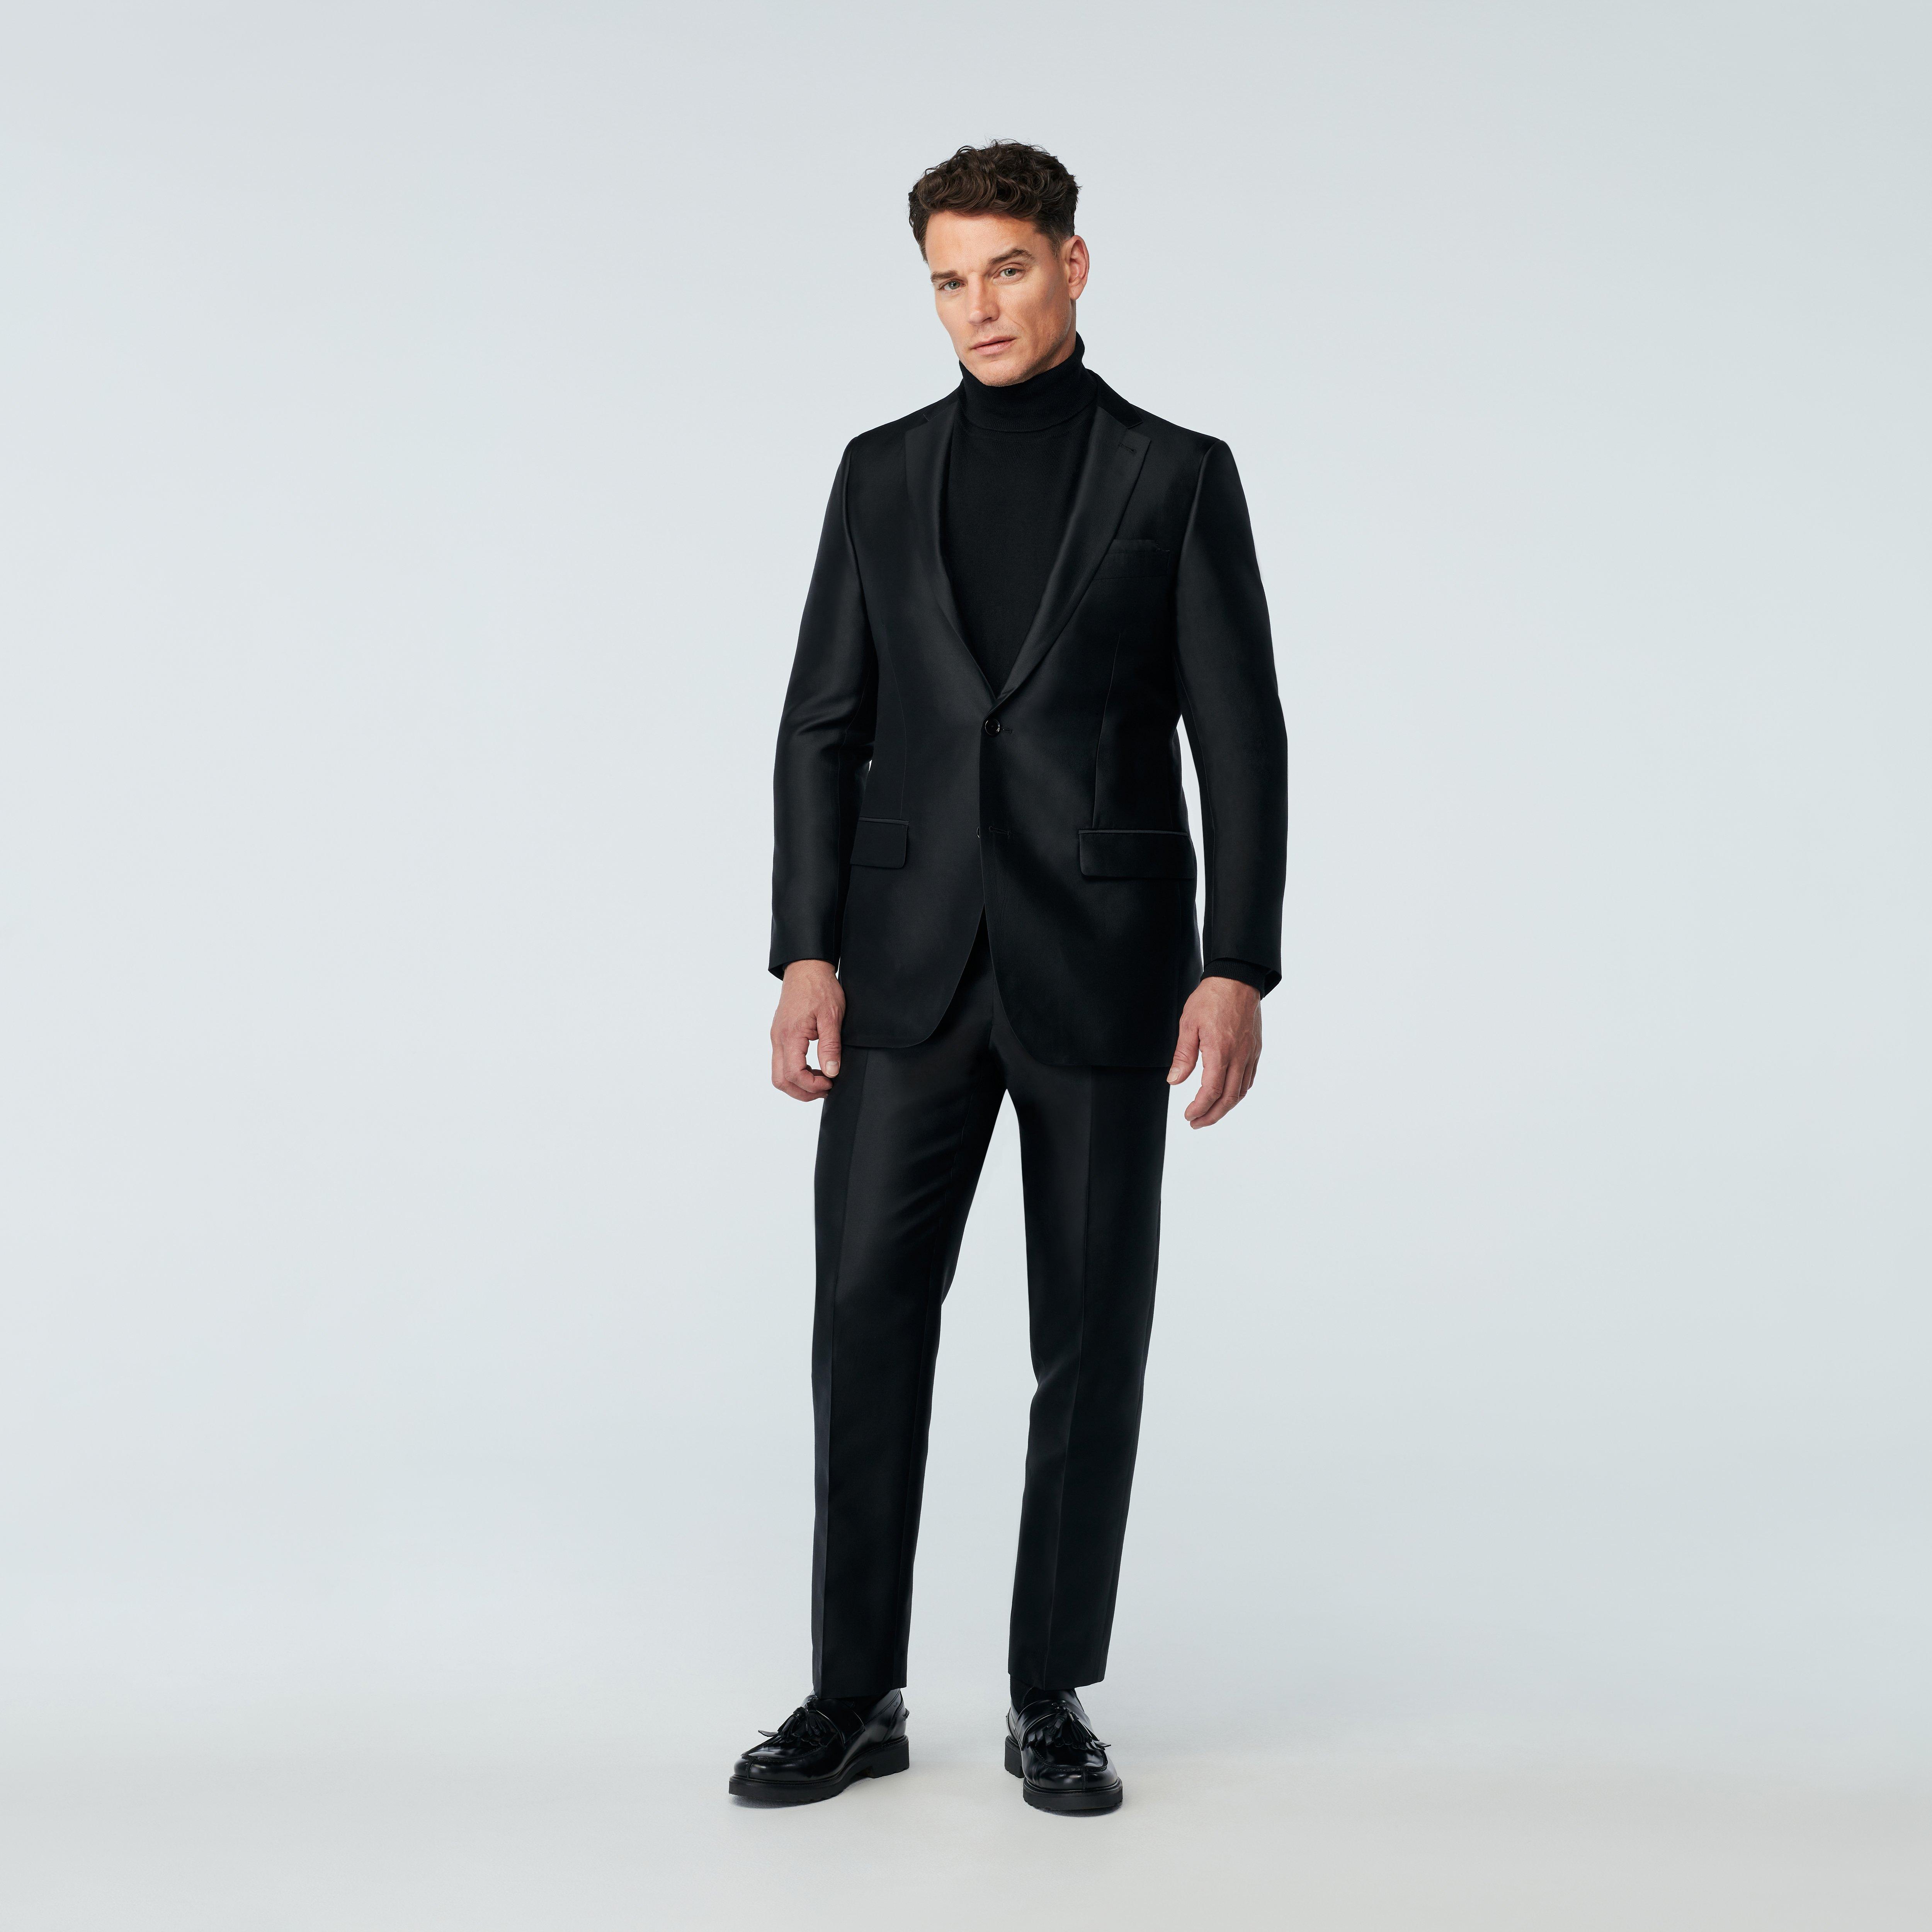 Custom Suits Made For You - Hythe Silk Wool Black Suit | INDOCHINO